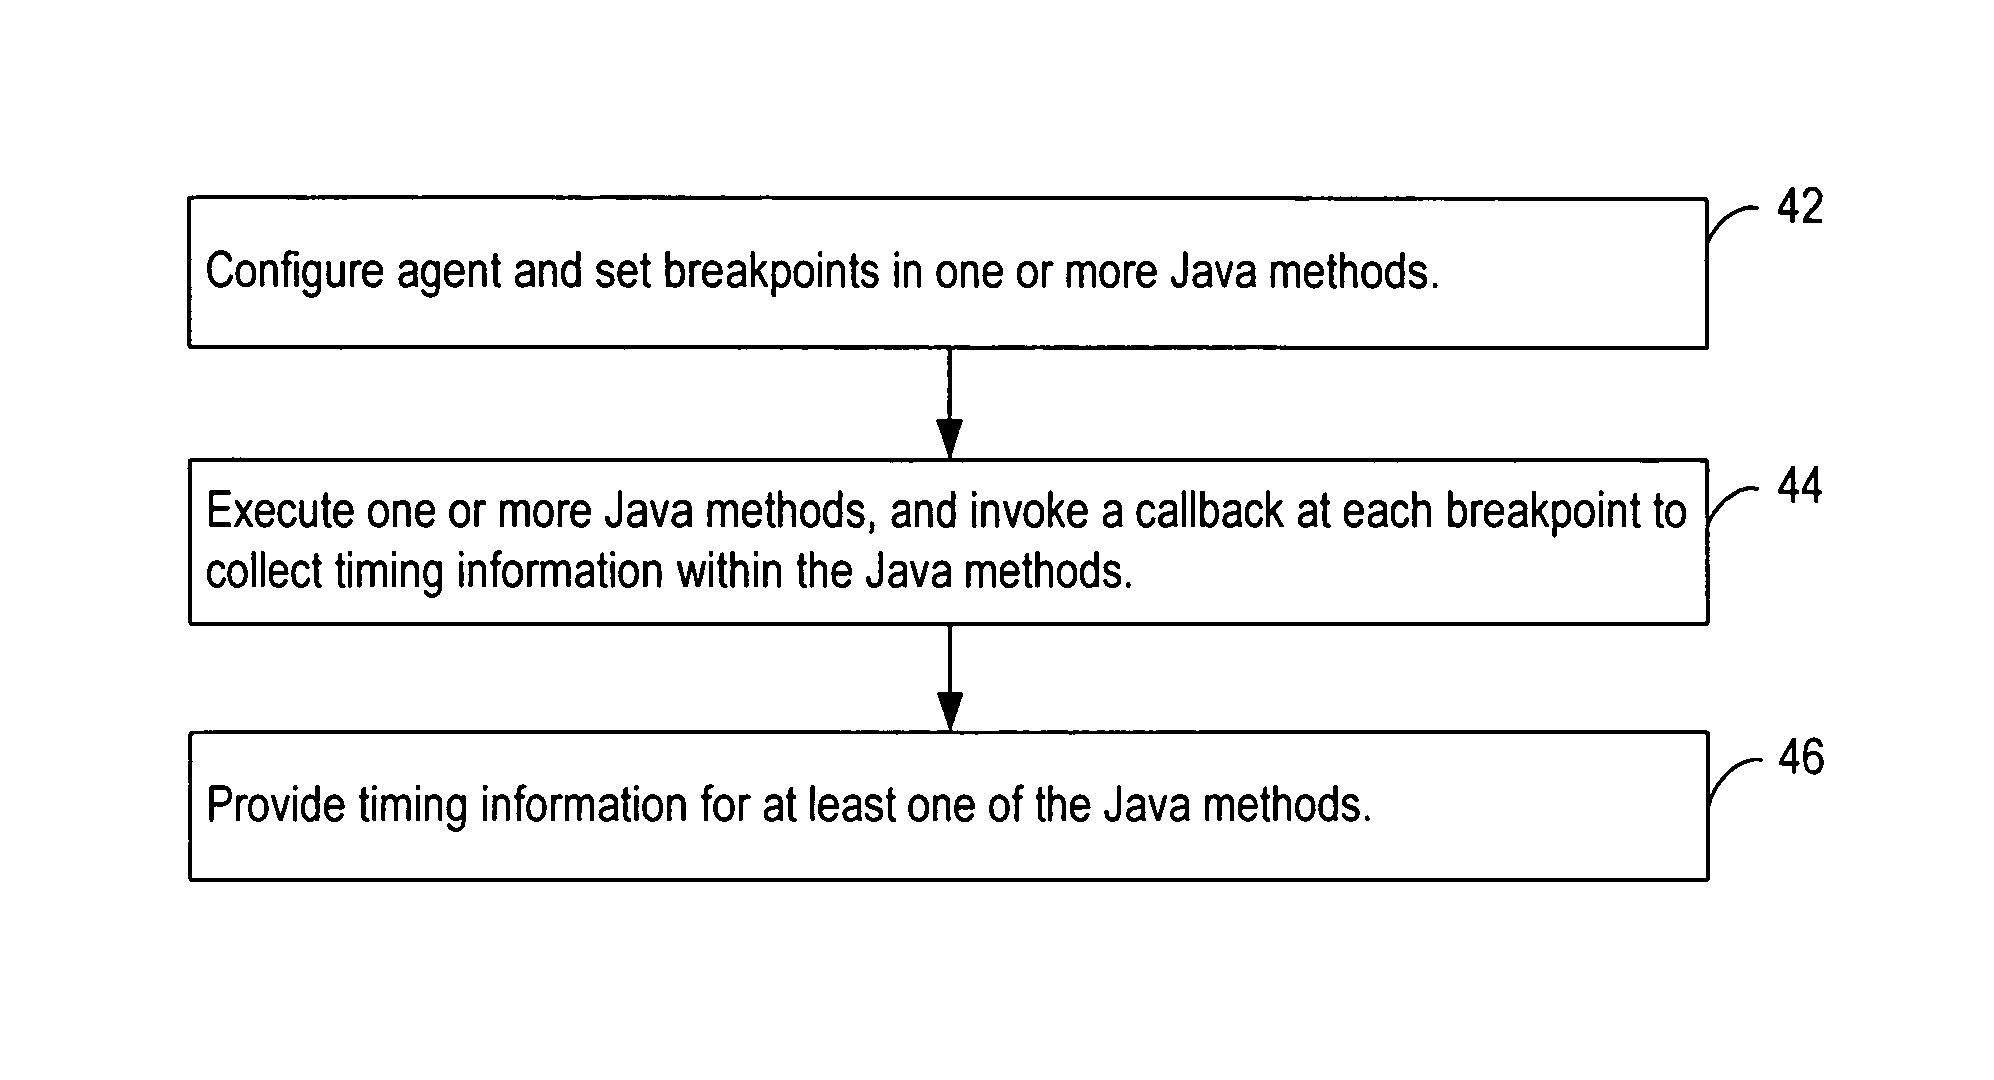 Dynamically profiling consumption of CPU time in Java methods with respect to method line numbers while executing in a Java virtual machine